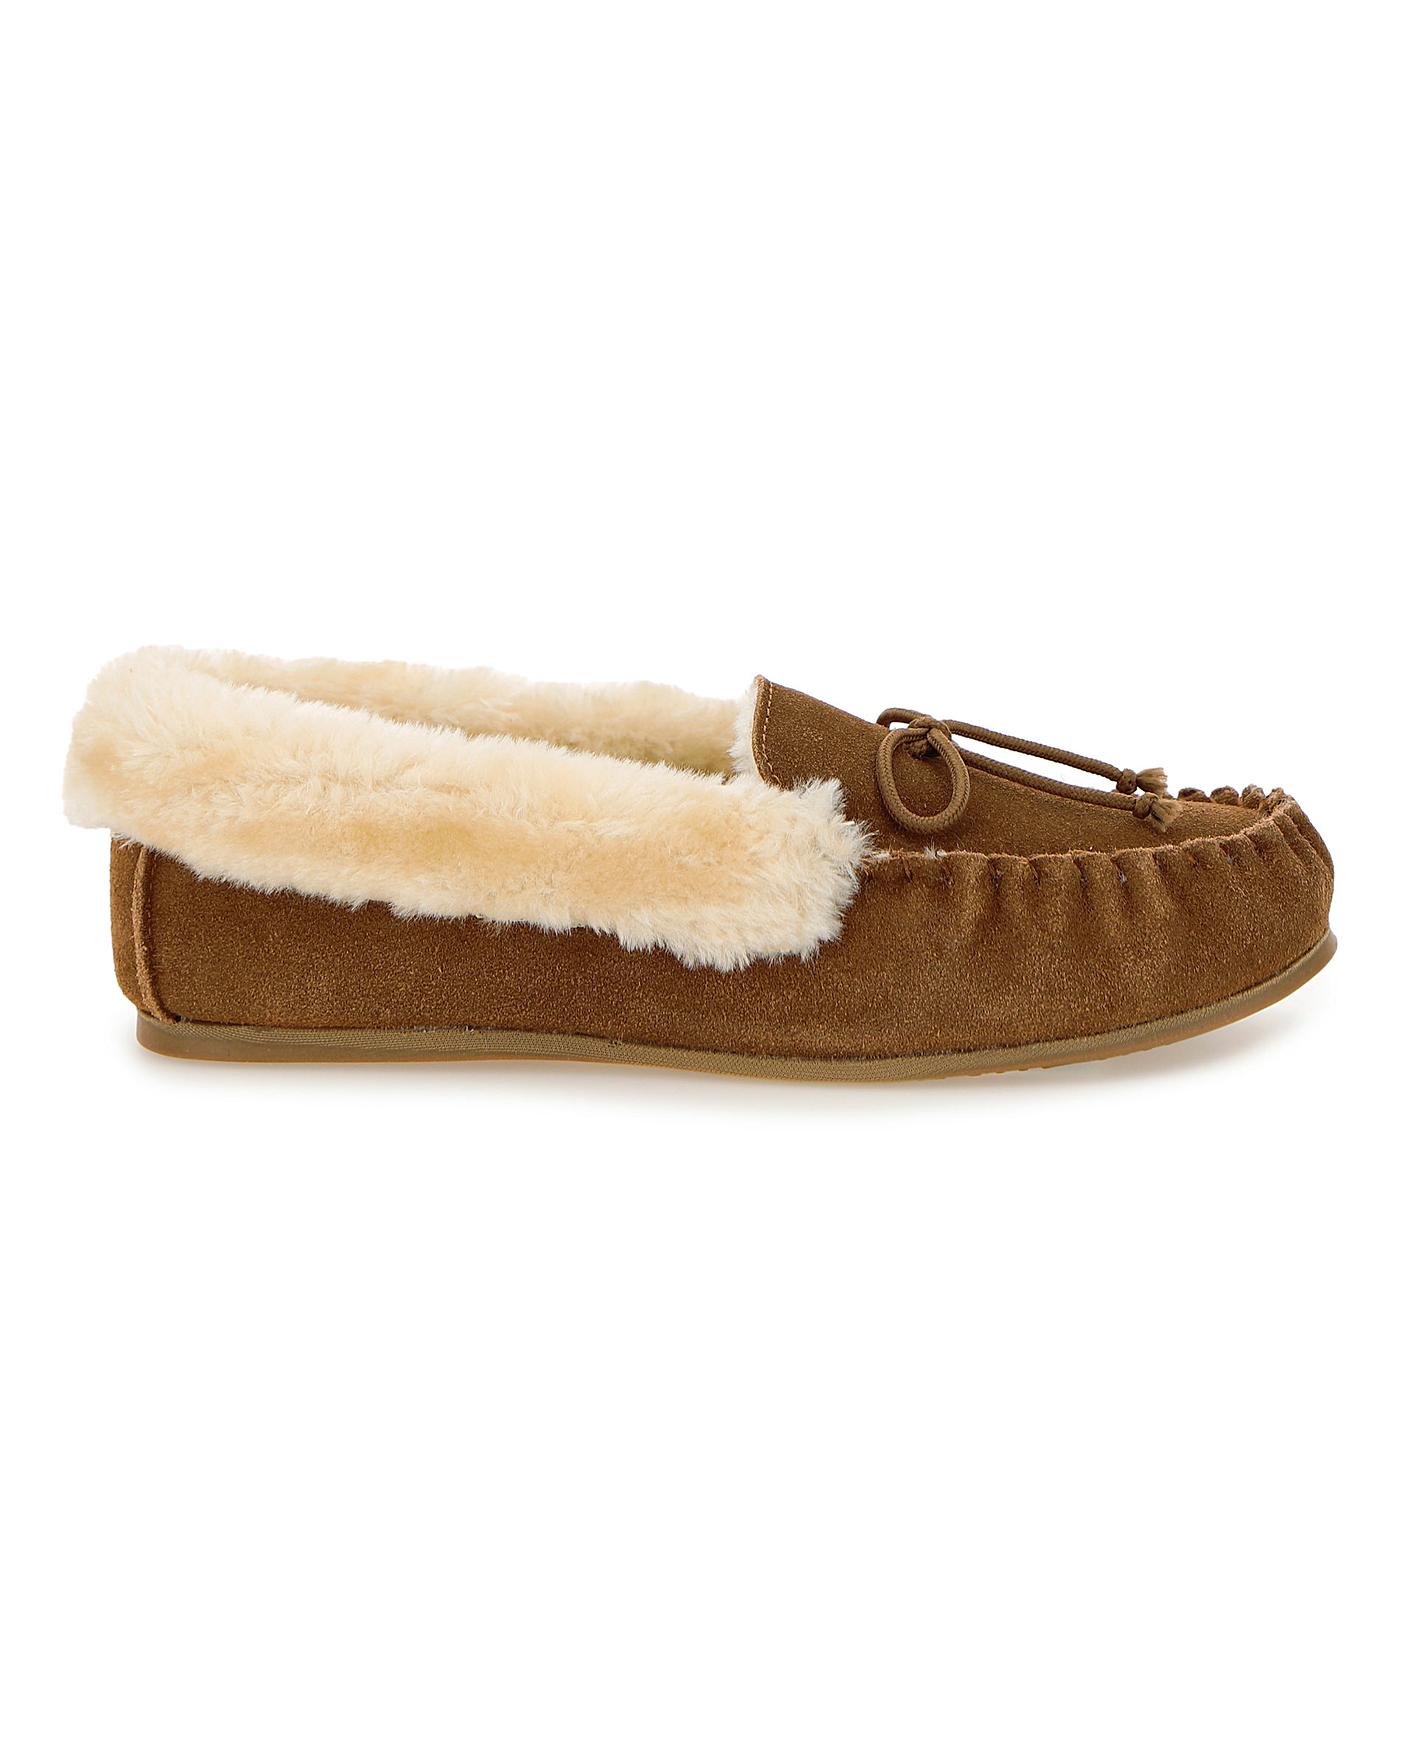 Suede Moccasin Slippers E Fit | J D Williams